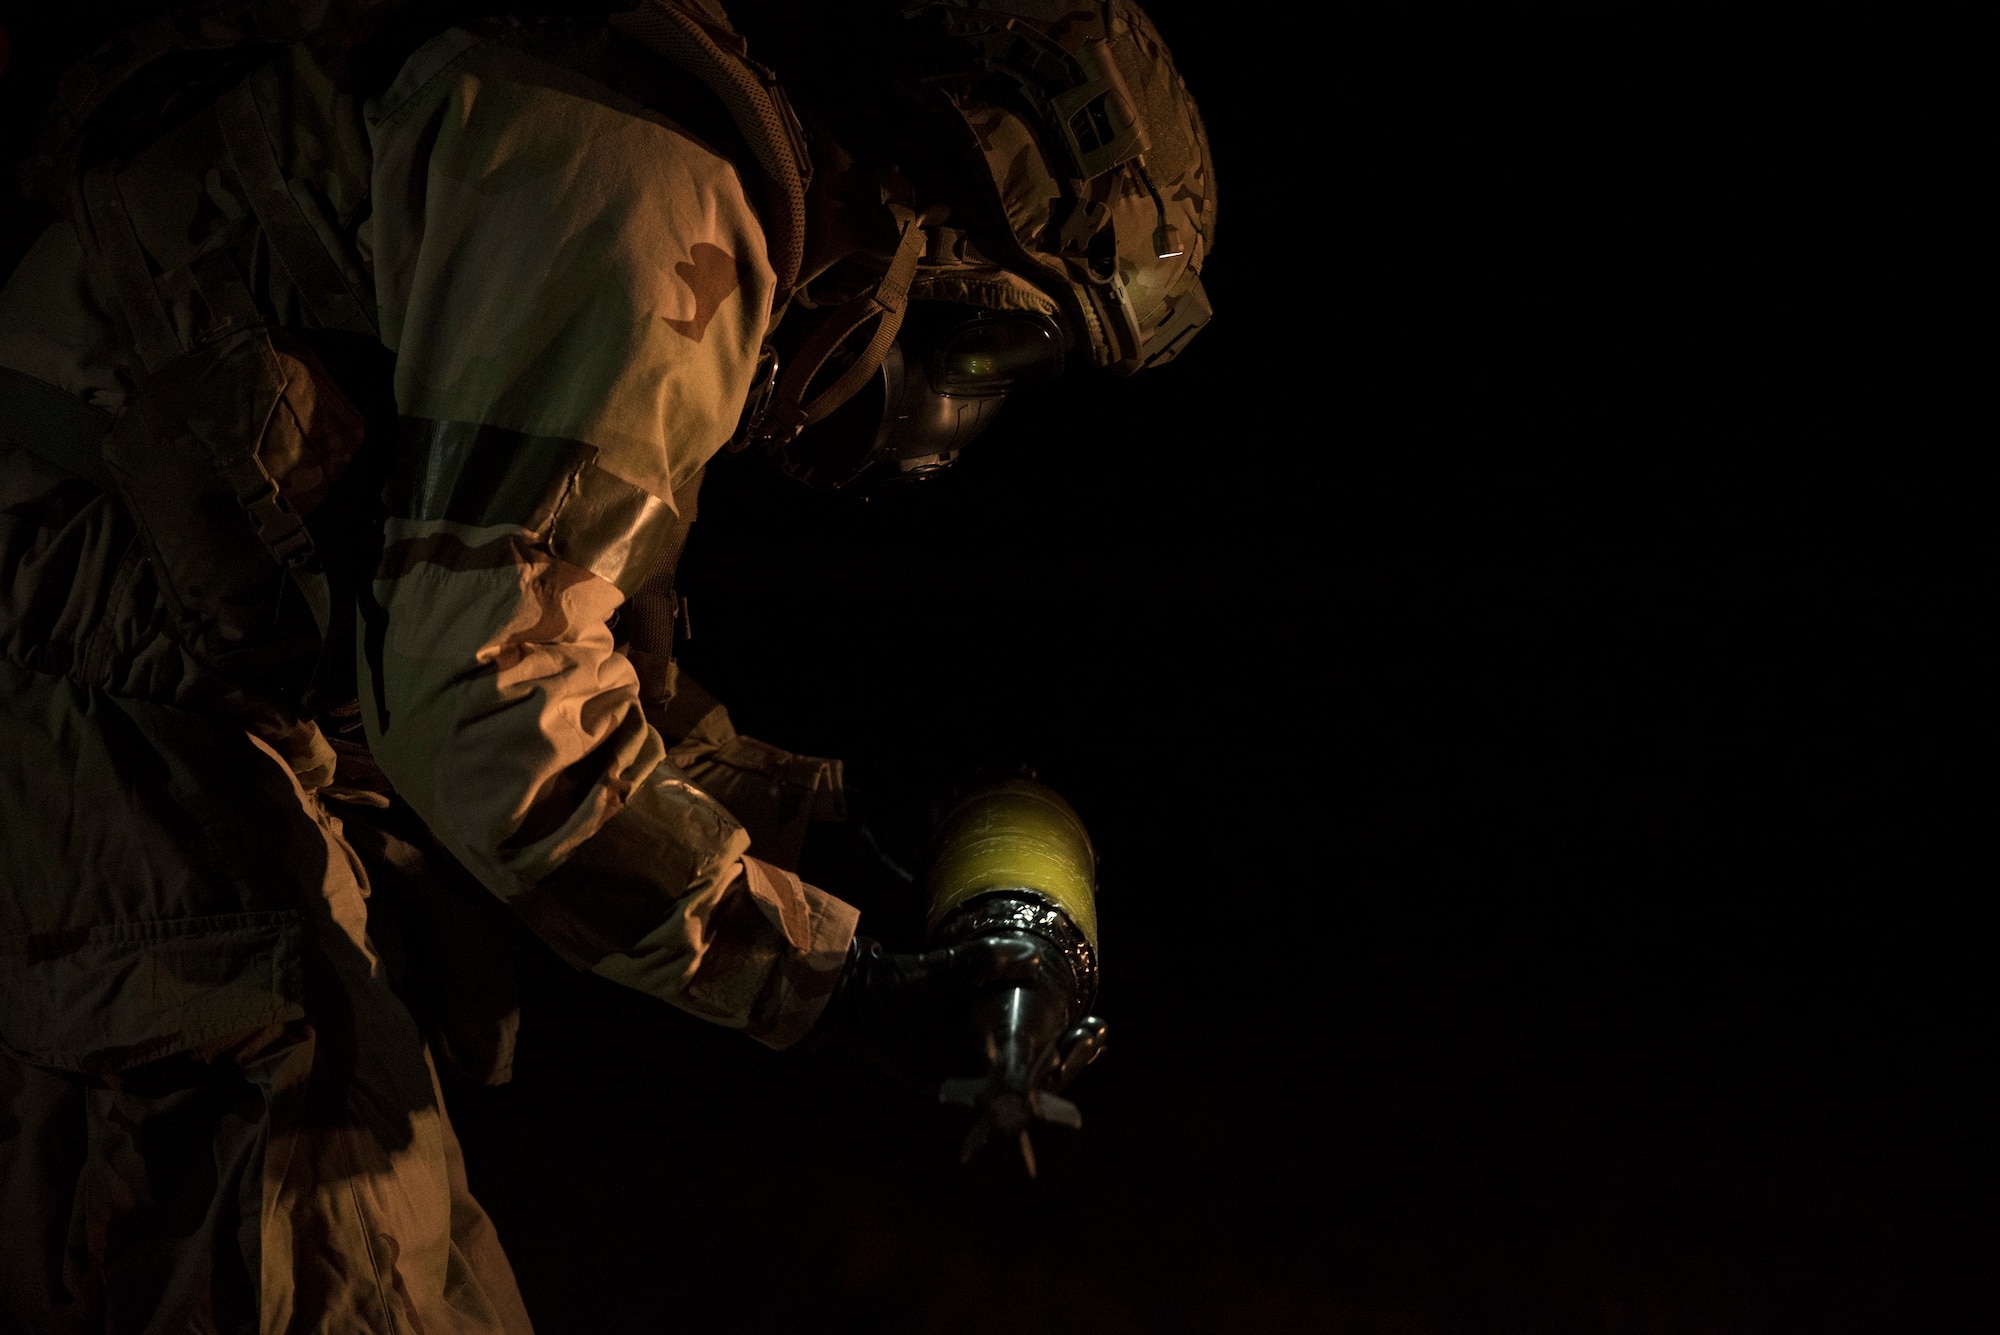 Staff Sgt. Justin Smith, 23d Civil Engineer Squadron explosive ordinance disposal flight’s NCO in charge of equipment, examines a simulated chemical bomb during a Mission Readiness Exercise, March 10, 2017, at Avon Park Air Force Range, Fla. The MRX took place March 2-13 and ensured the 822d Base Defense Squadron could efficiently deploy anywhere in the world in less than 72 hours. During the two week MRX, the squadron was evaluated on its ability to set-up a bare base, effectively thwart enemy attacks, run a secure Tactical Operation Center and maintain positive relationships with villagers in surrounding areas. (U.S. Air Force Photo by Airman 1st Class Janiqua P. Robinson)